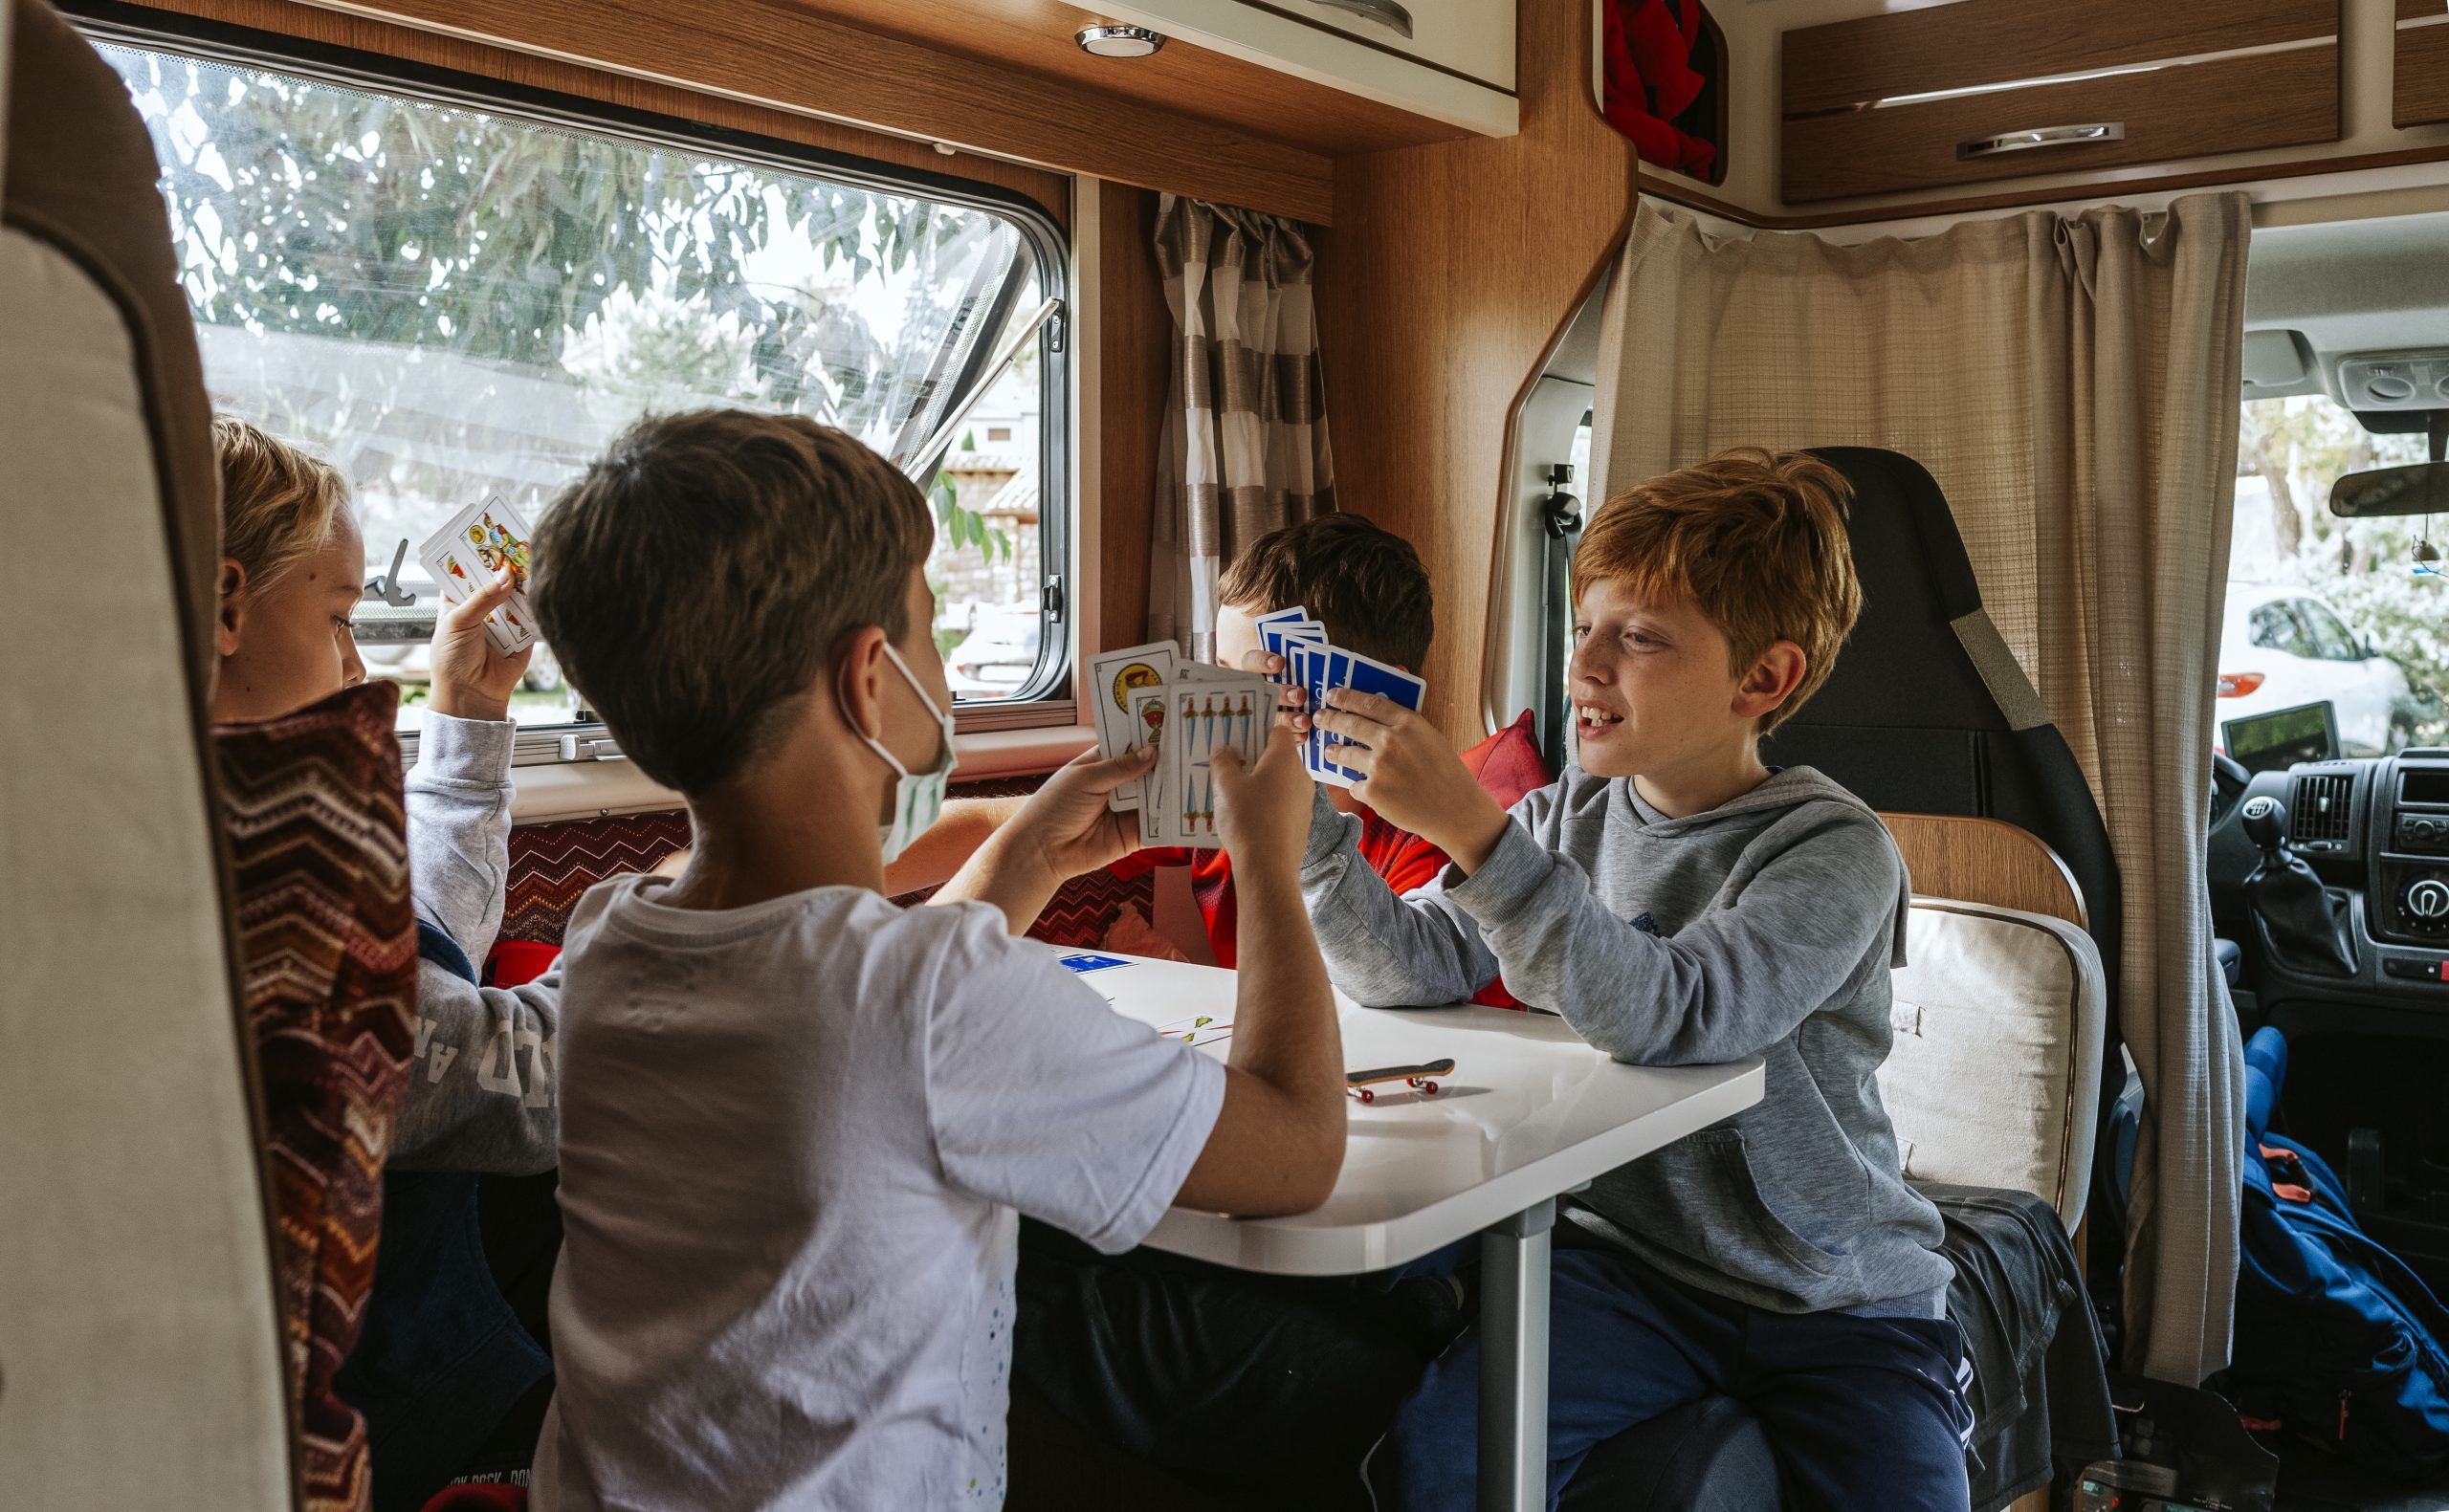 Children playing cards in an rv motorhome trailer on road trip camping